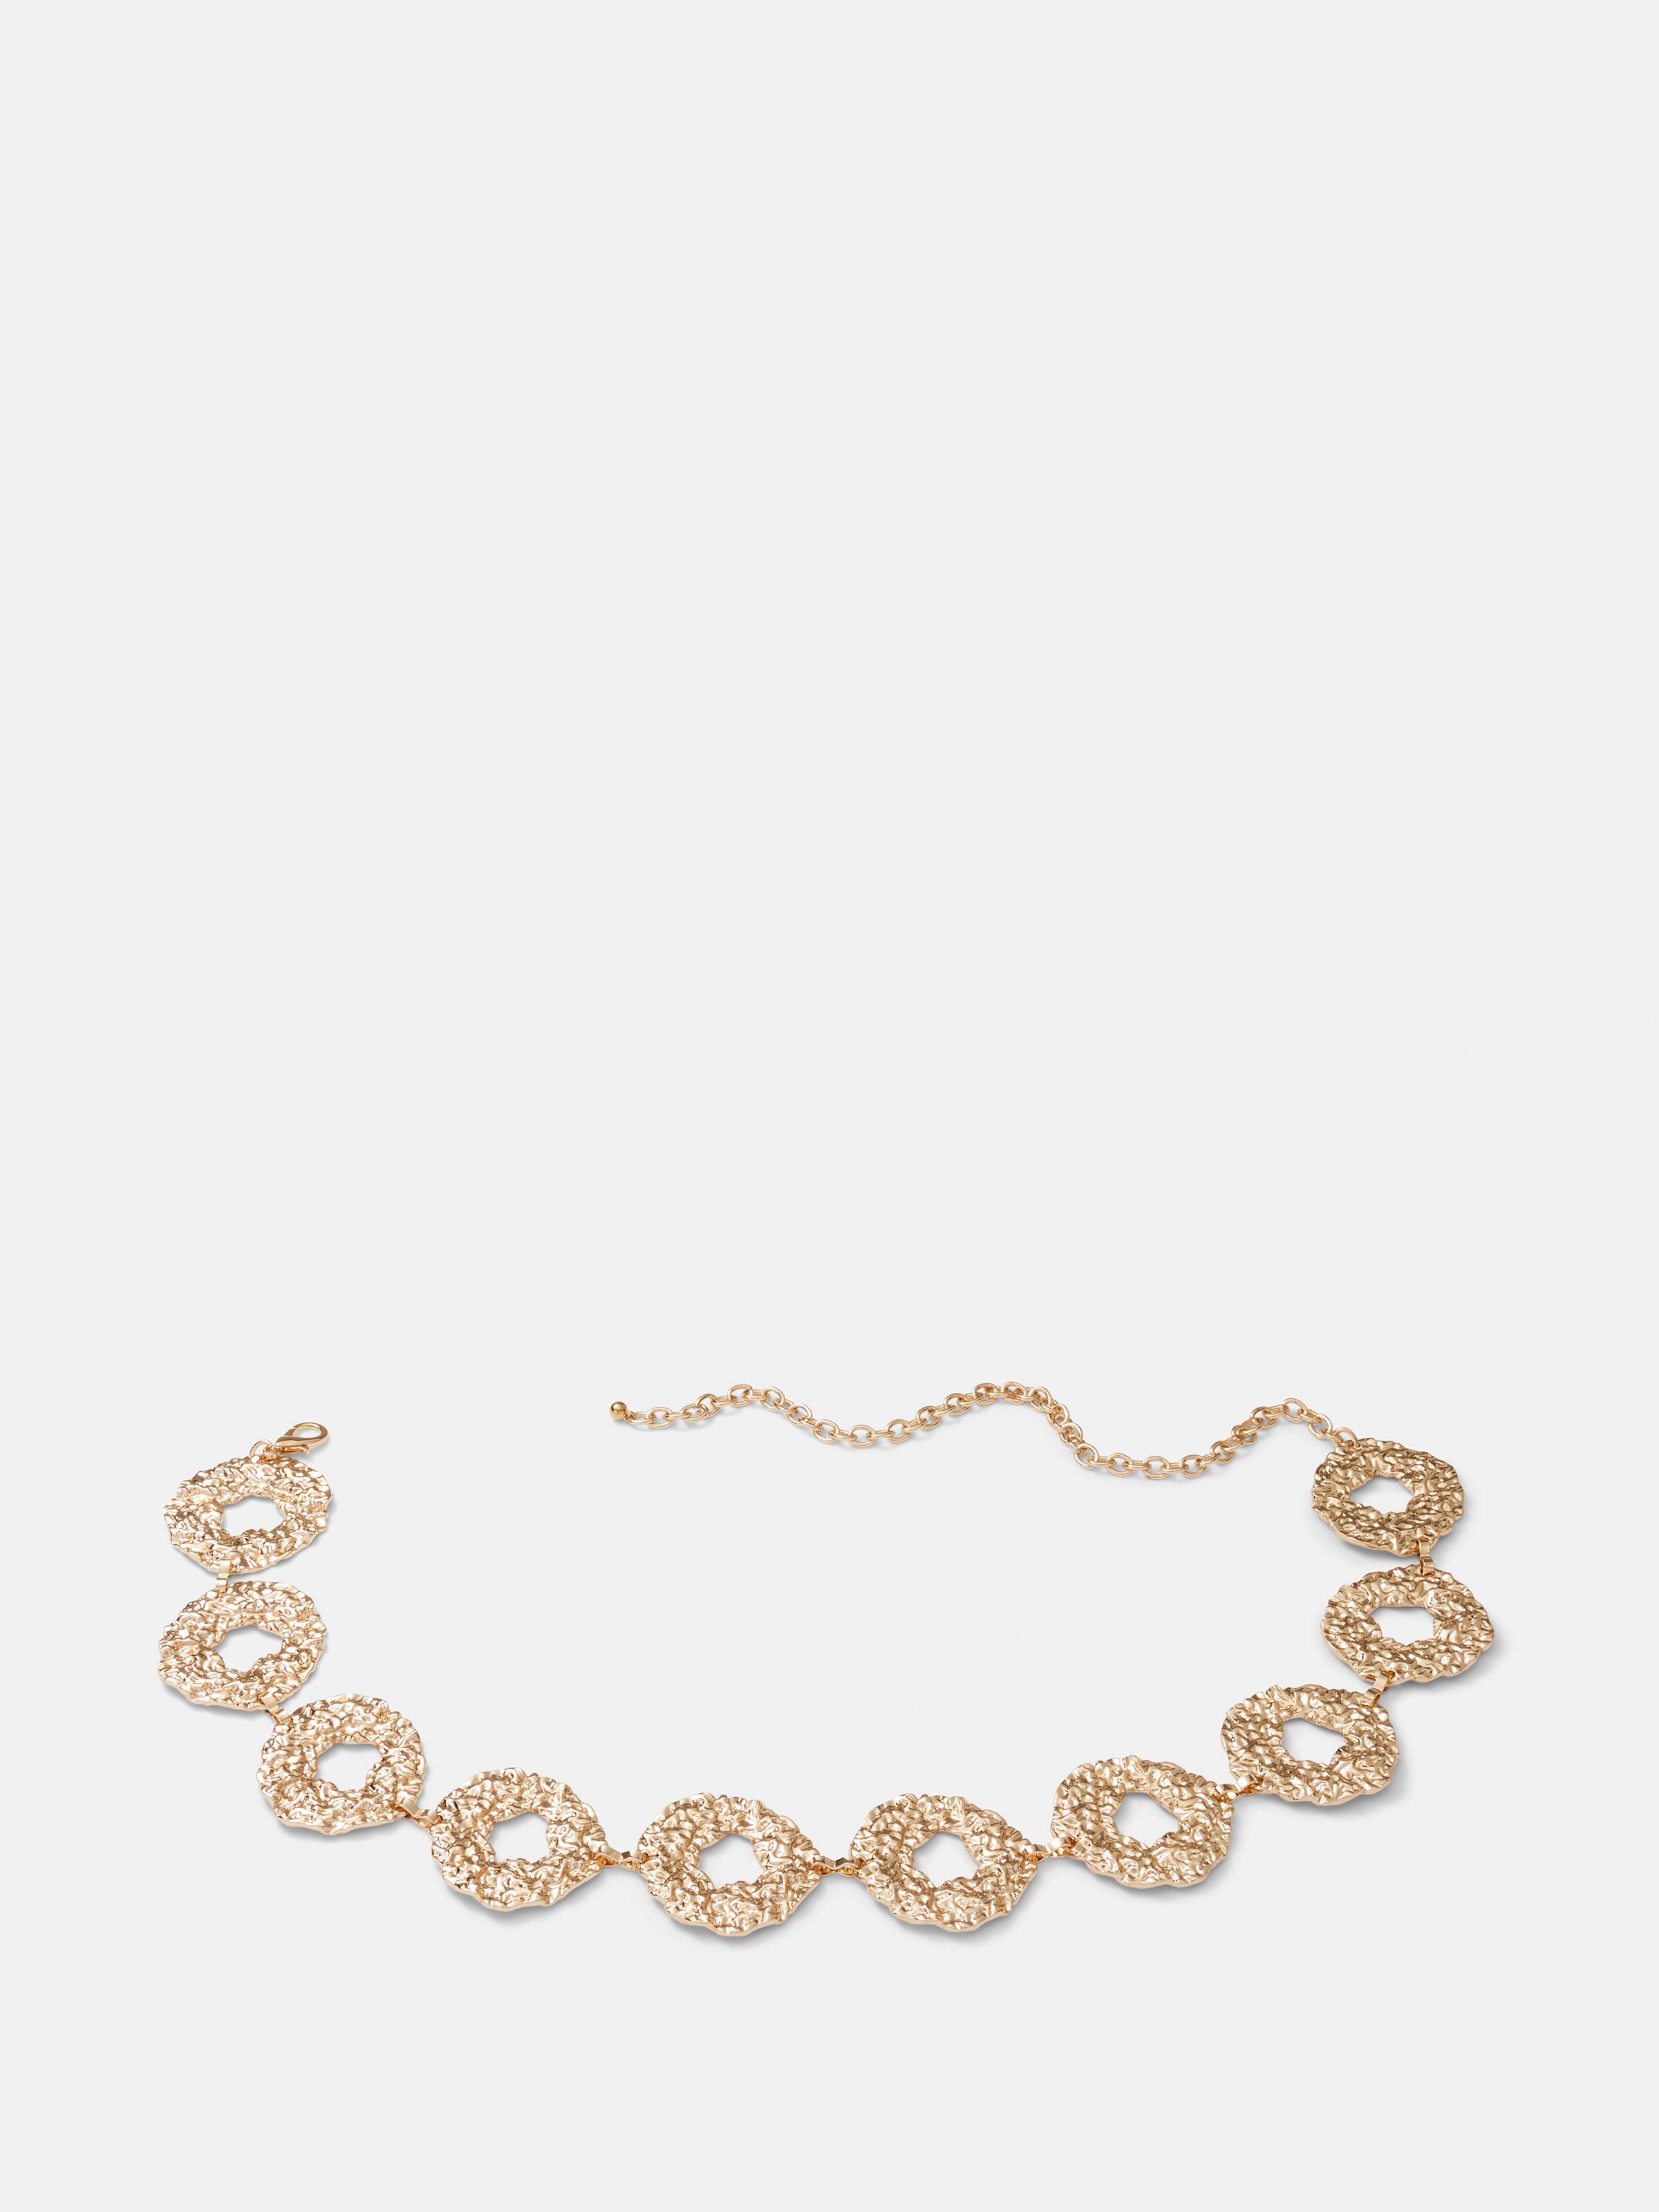 Anika Abstract Link Chain Belt